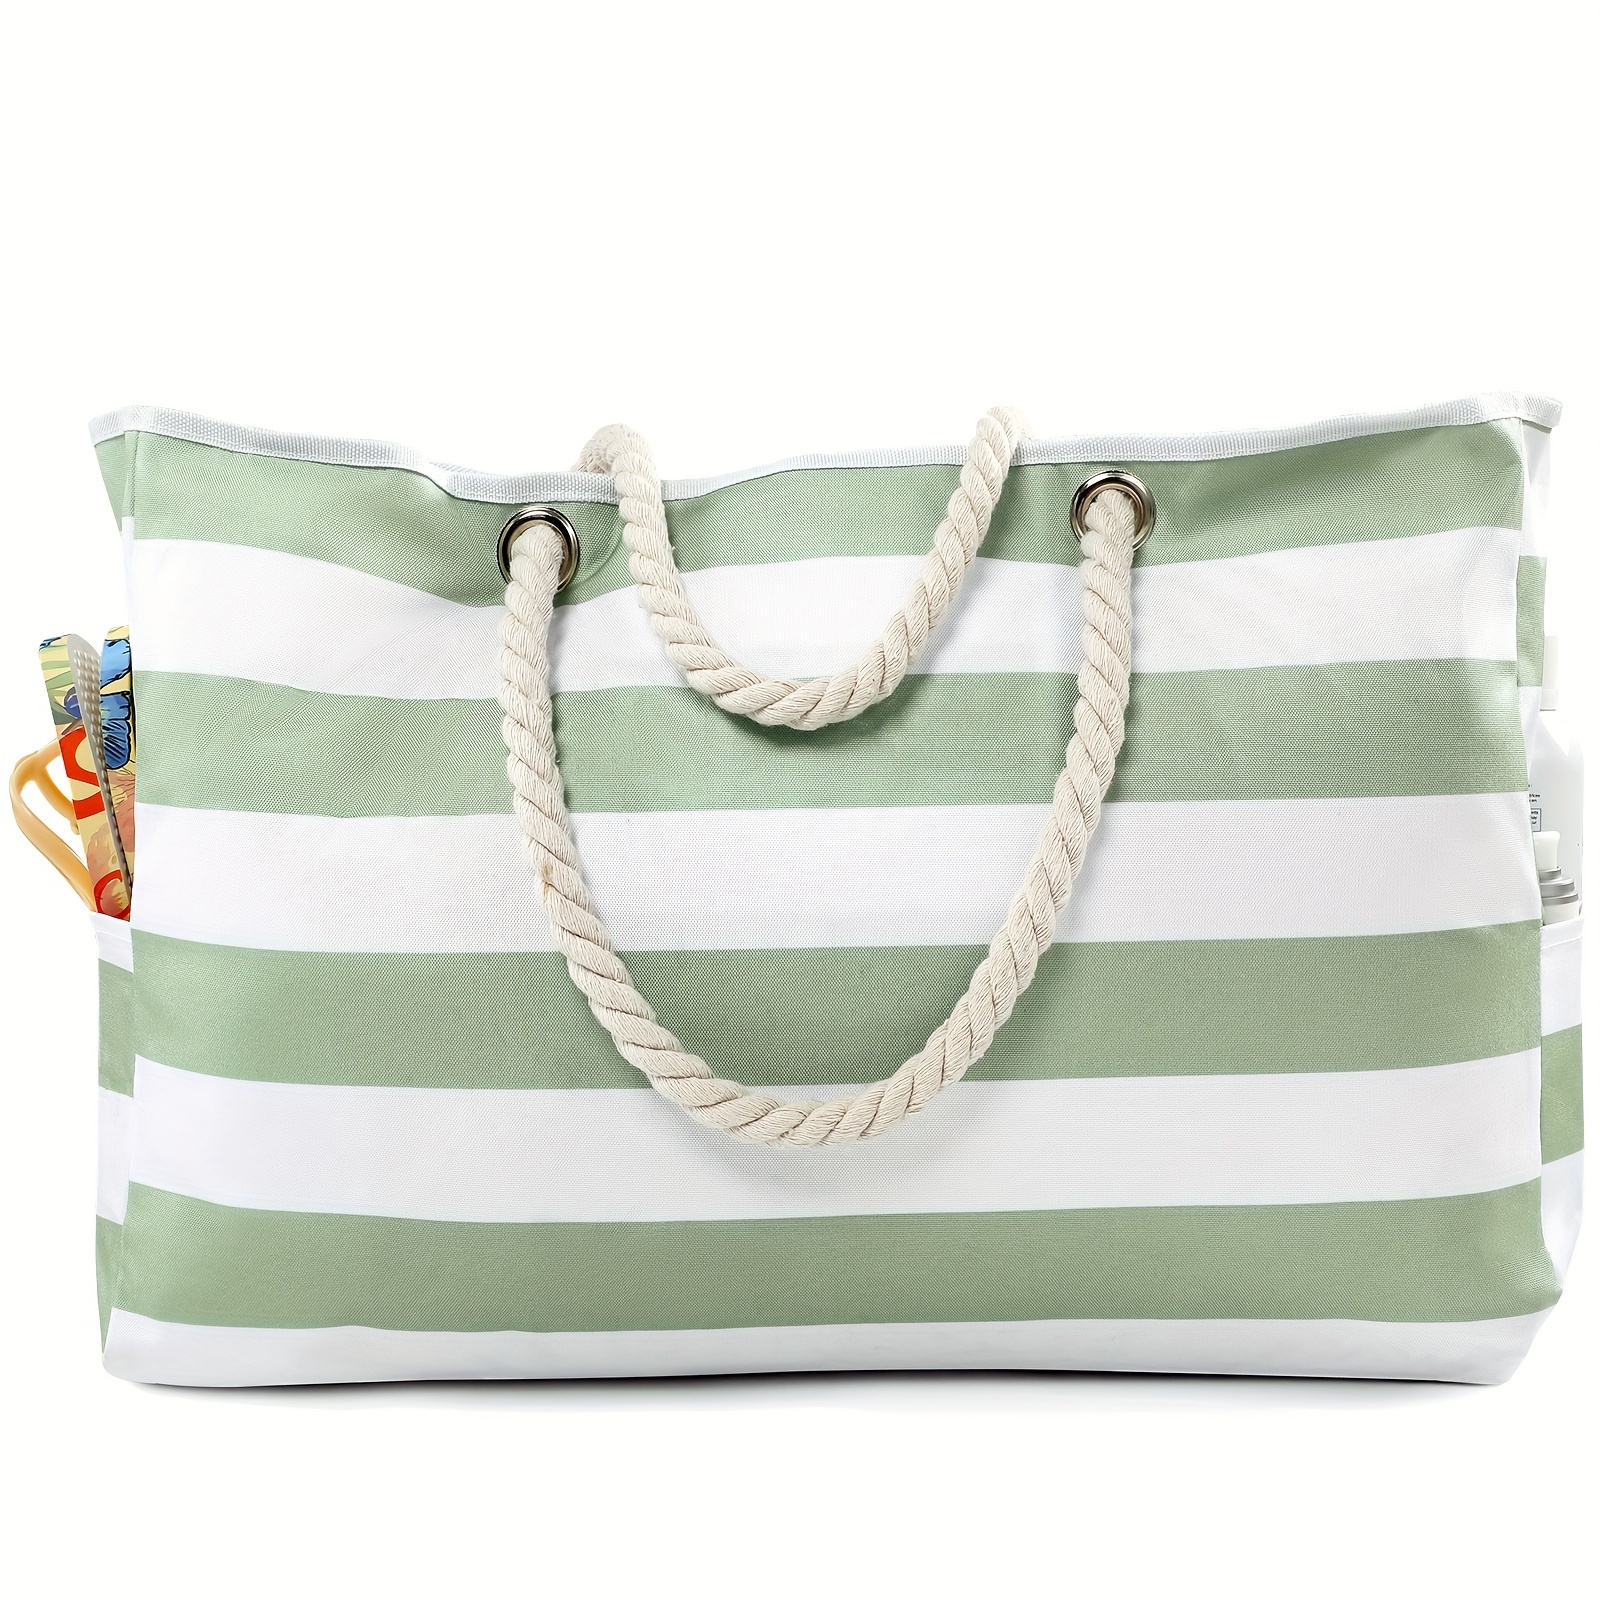 

Simple Large Capacity Striped Pattern Shoulder Bag, Lightweight Multifunctional Toiletry Wash Handbag For Women's Summer Vacation Use